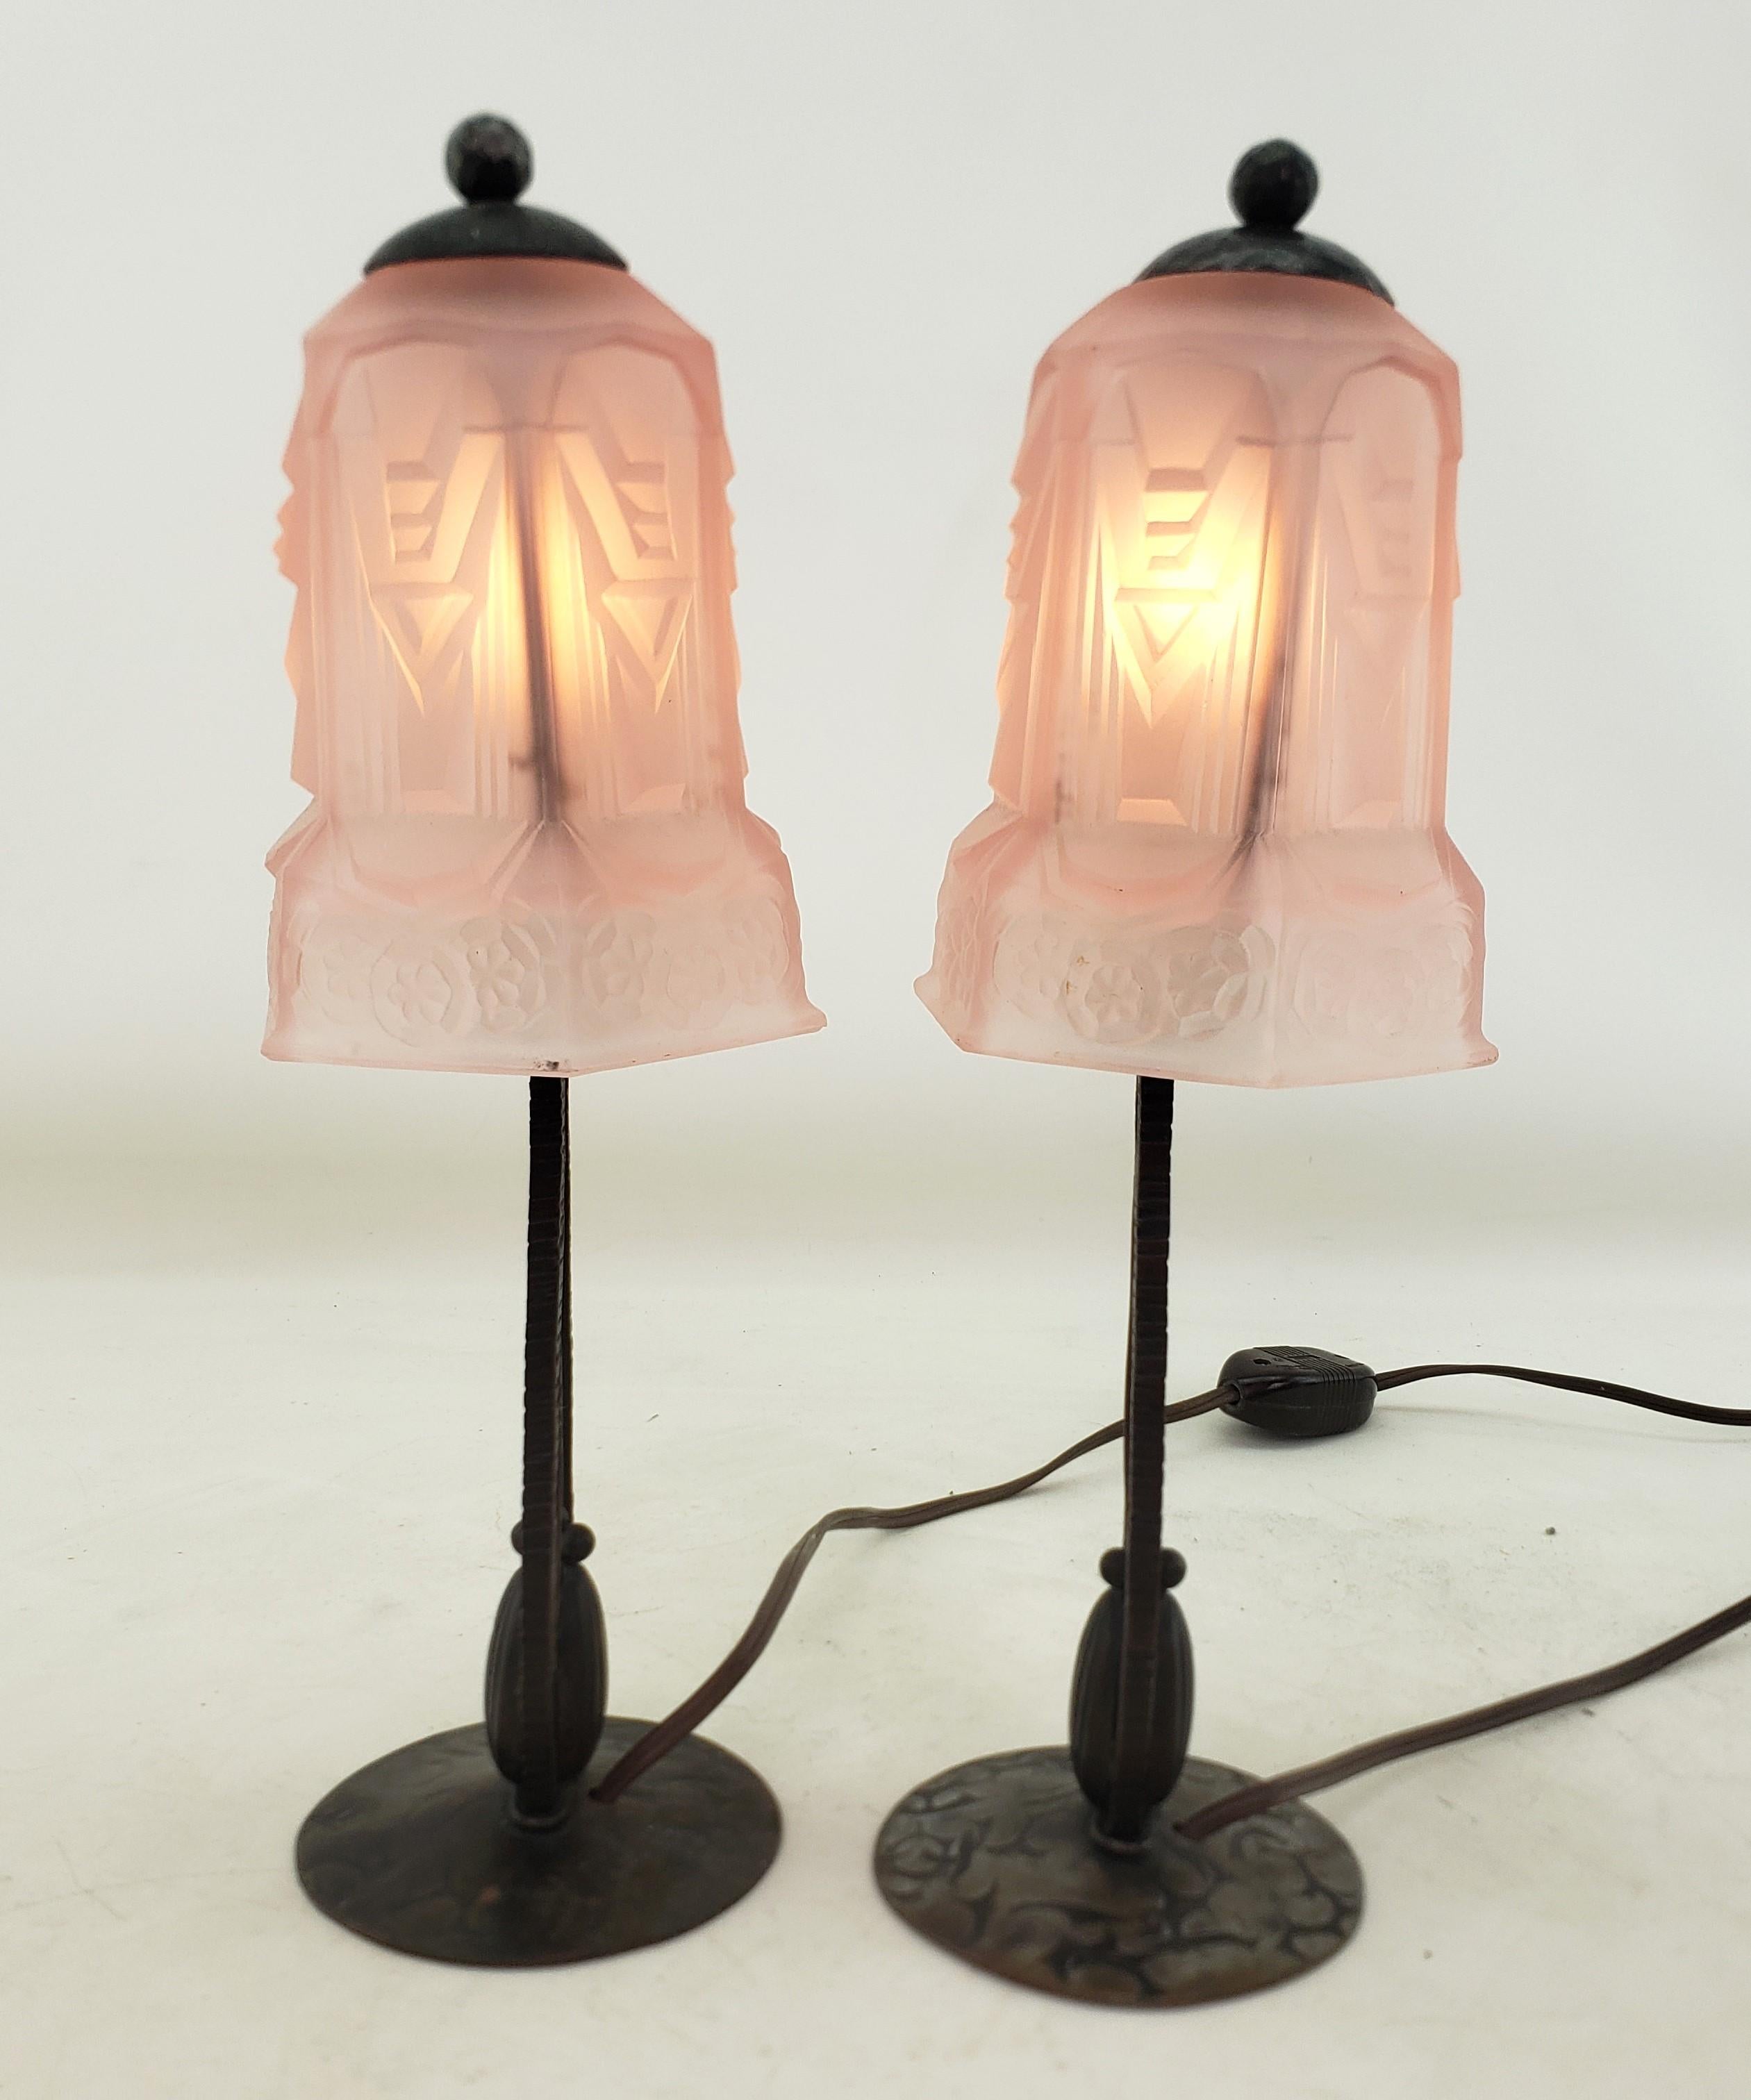 Pair of Antique Art Deco Bourdoir or Table Lamps with Frosted Pink Glass Shades For Sale 2